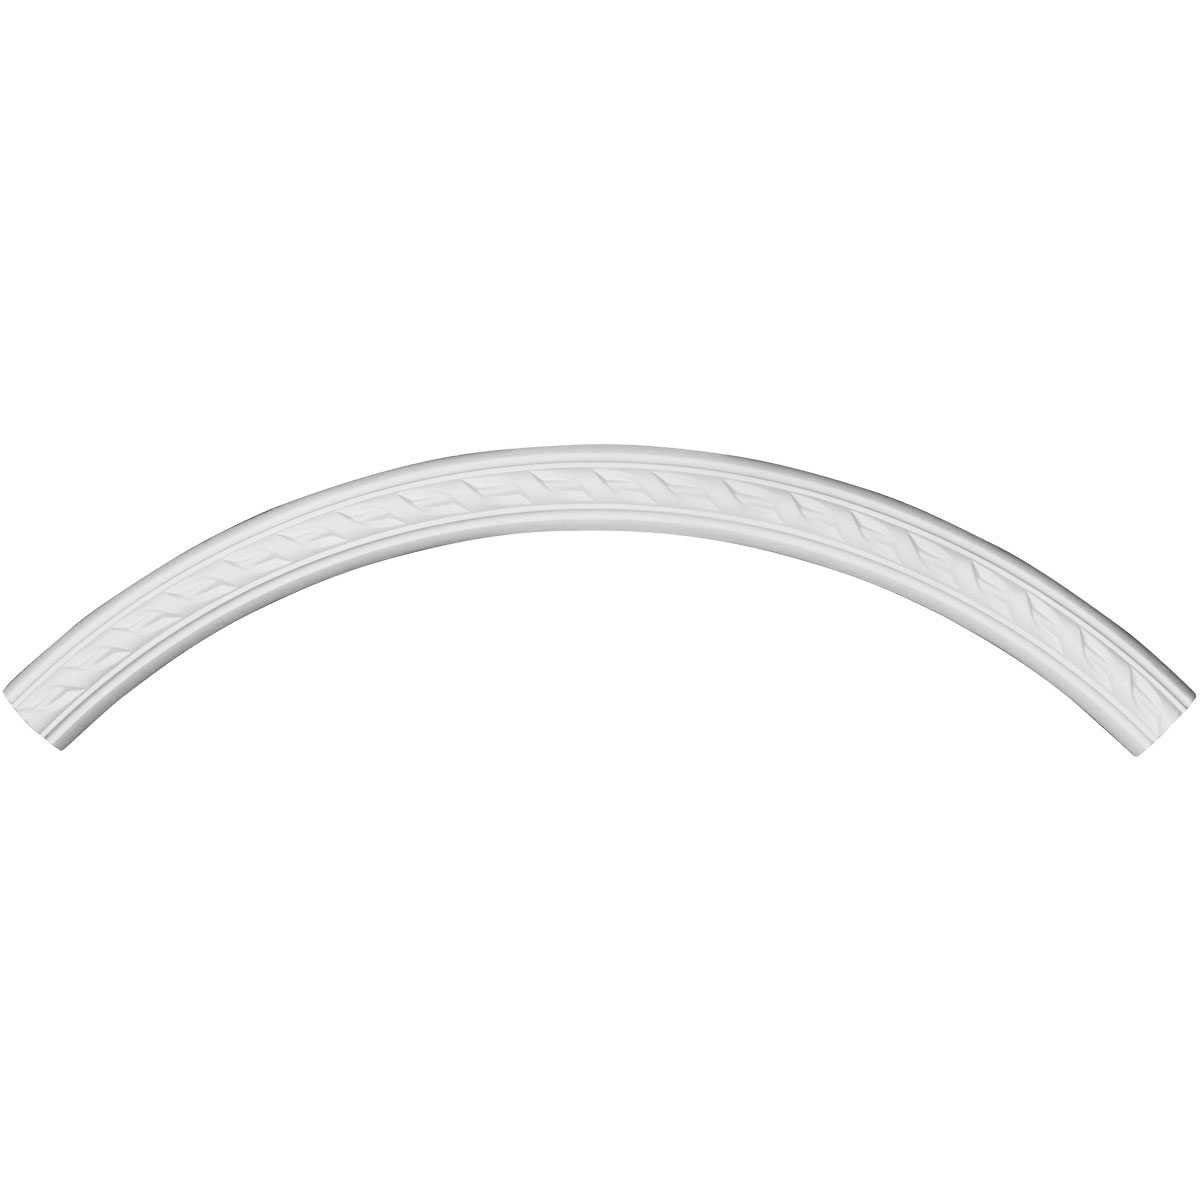 39 3/8'OD x 35 1/2'ID x 2'W x 7/8'P Medway Ceiling Ring (1/4 of complete circle)